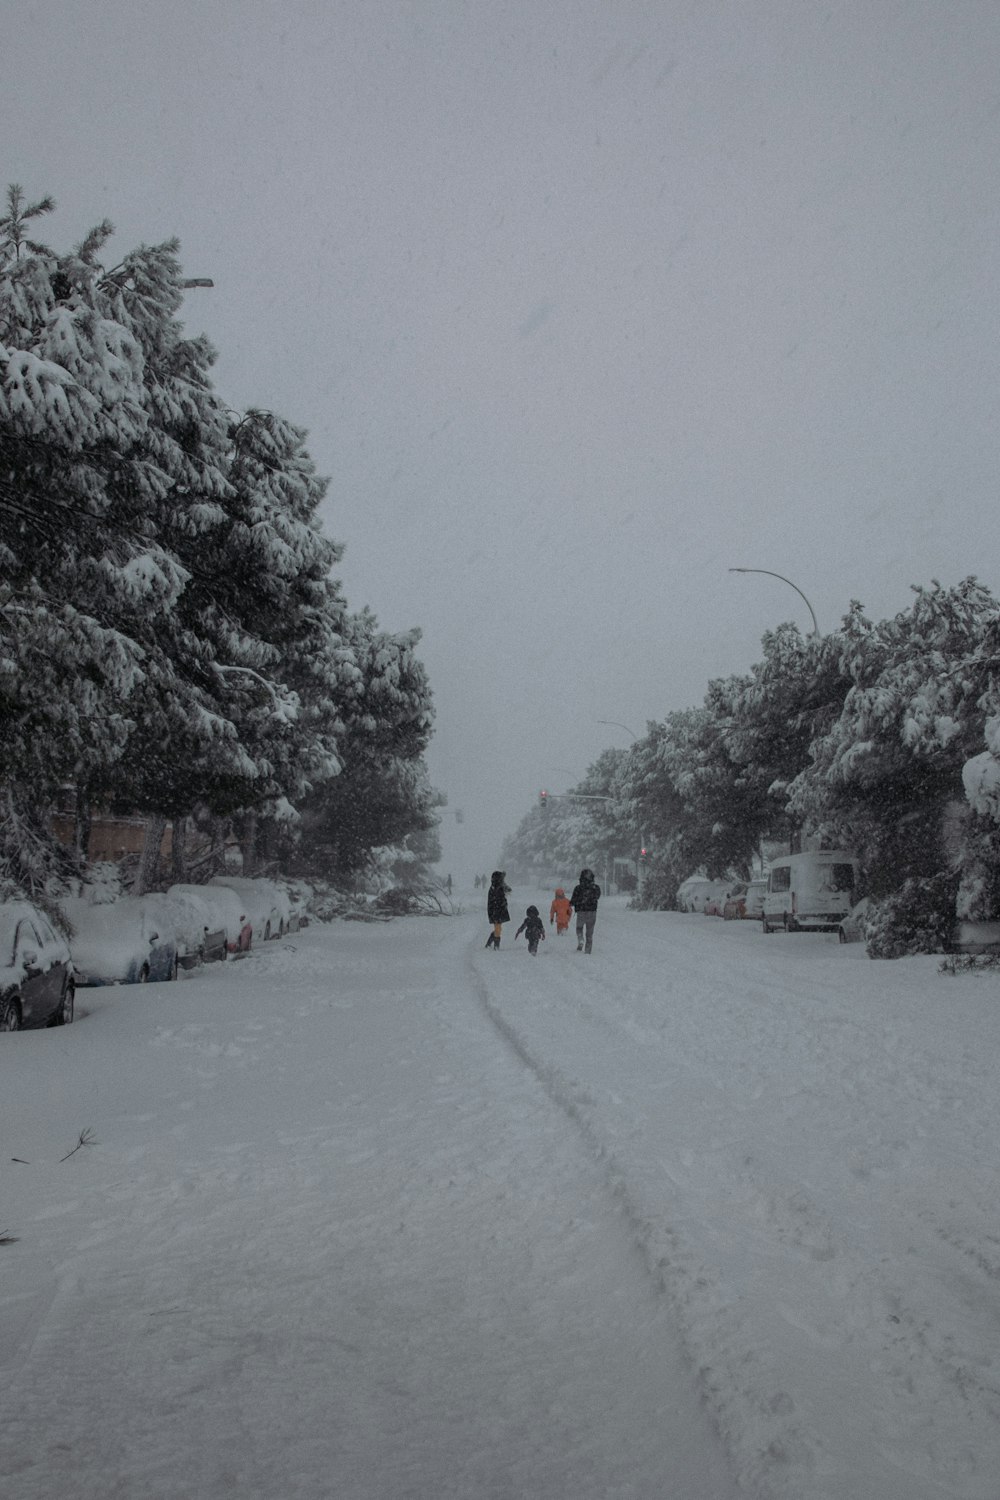 people walking on snow covered road during daytime